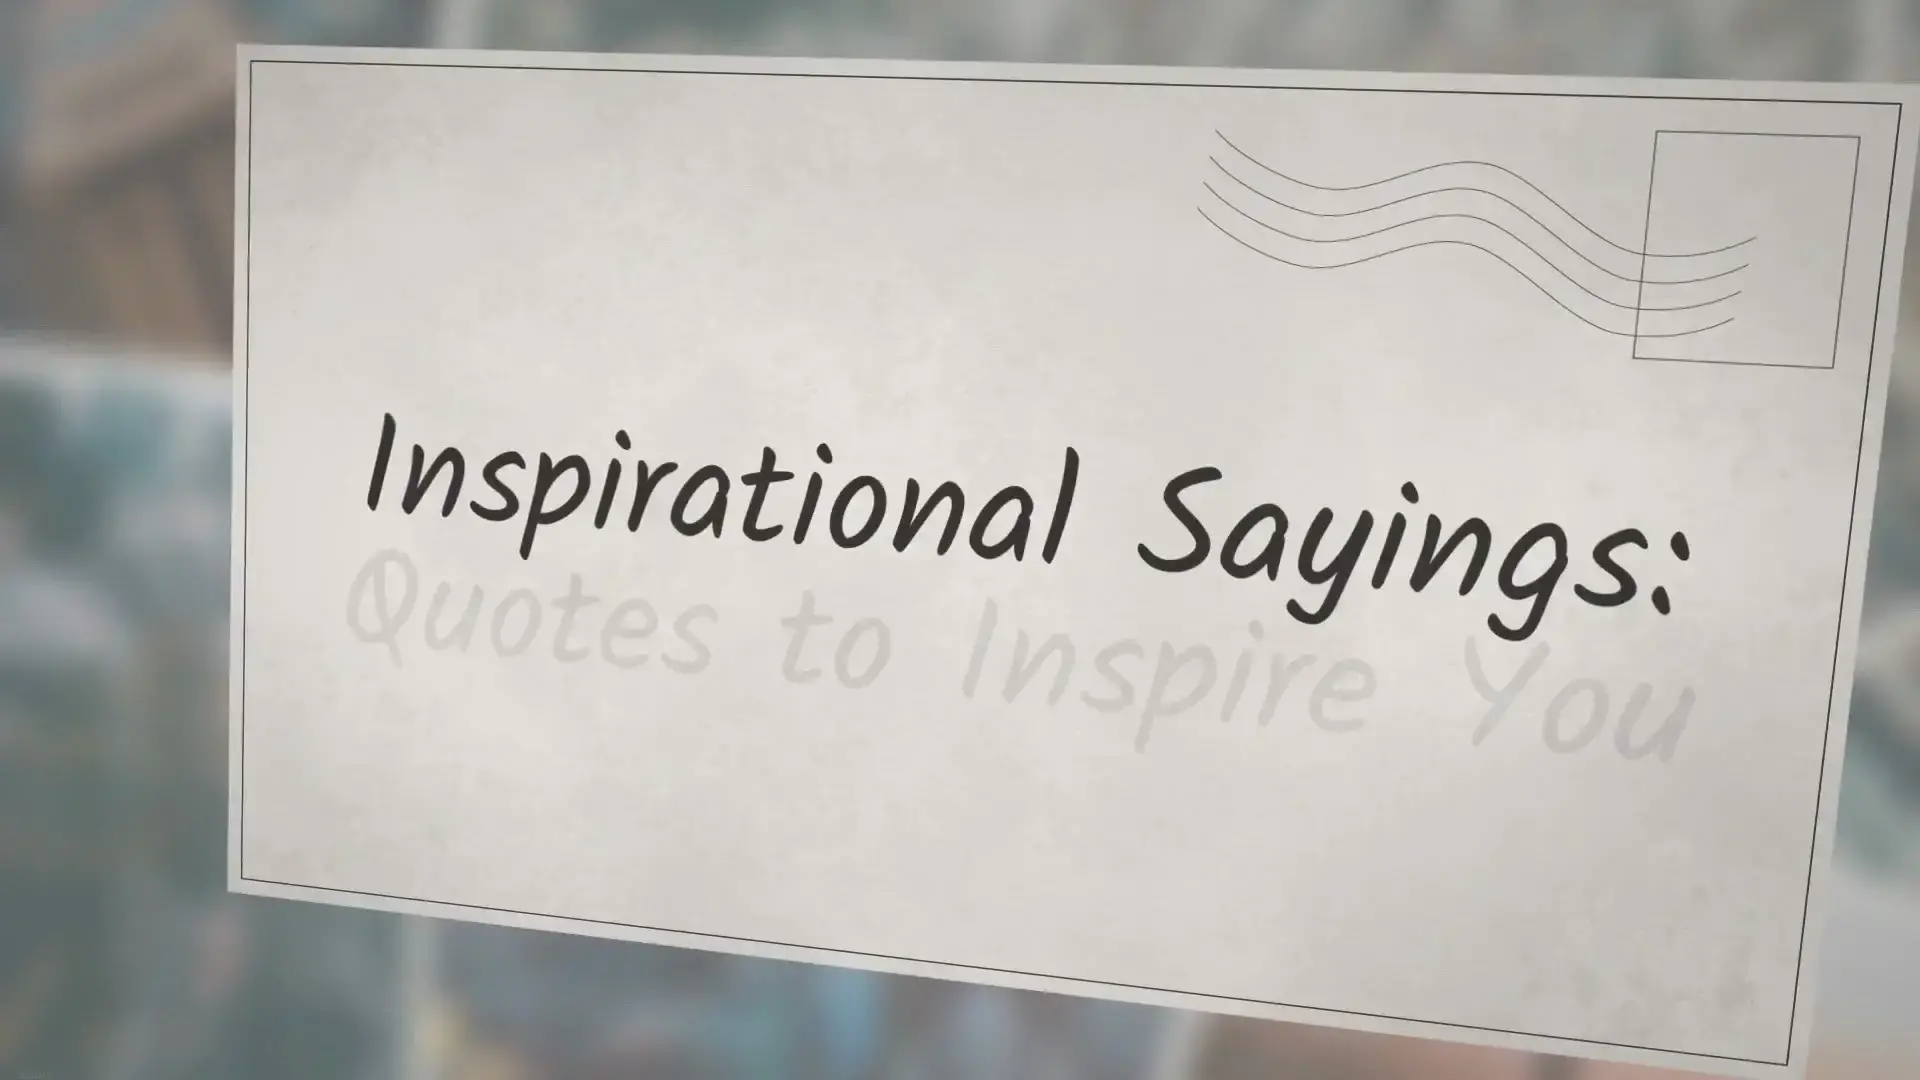 'Video thumbnail for Inspirational Sayings: Quotes to Inspire You'